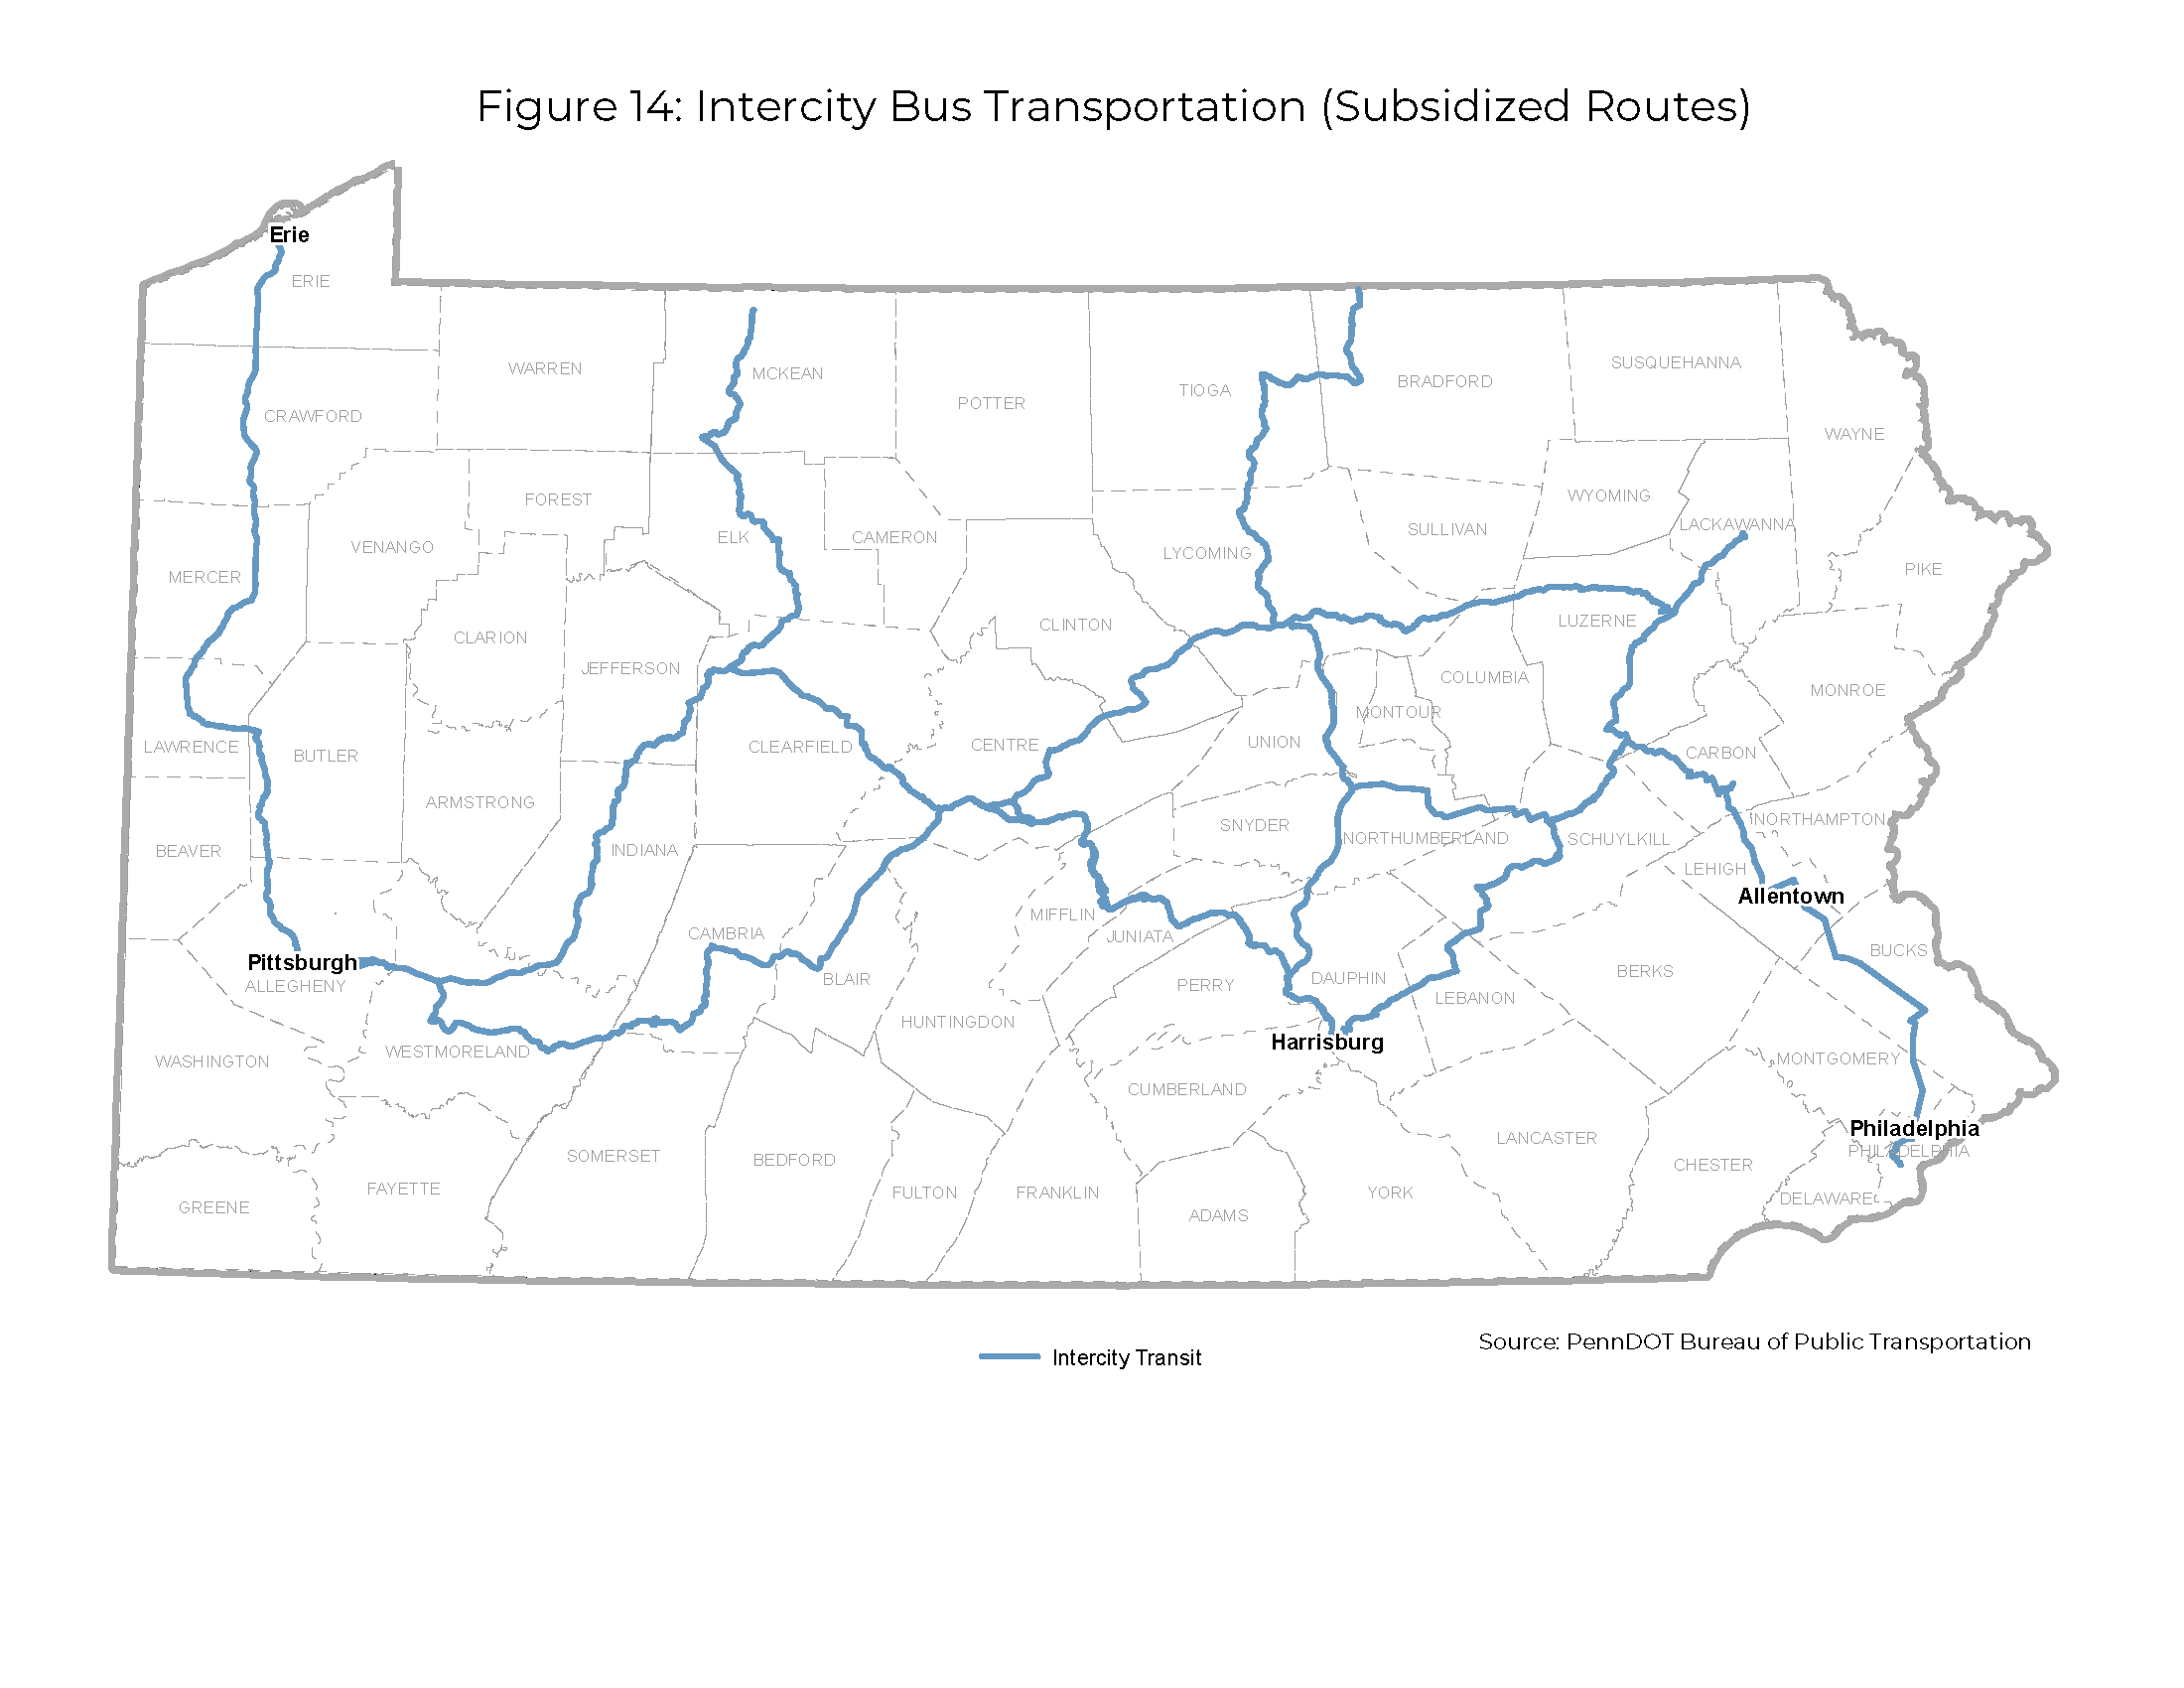 A map of Pennsylvania illustrating the intercity transit routes from Erie, Pittsburgh, Harrisburg, Allentown, and Philadelphia. 